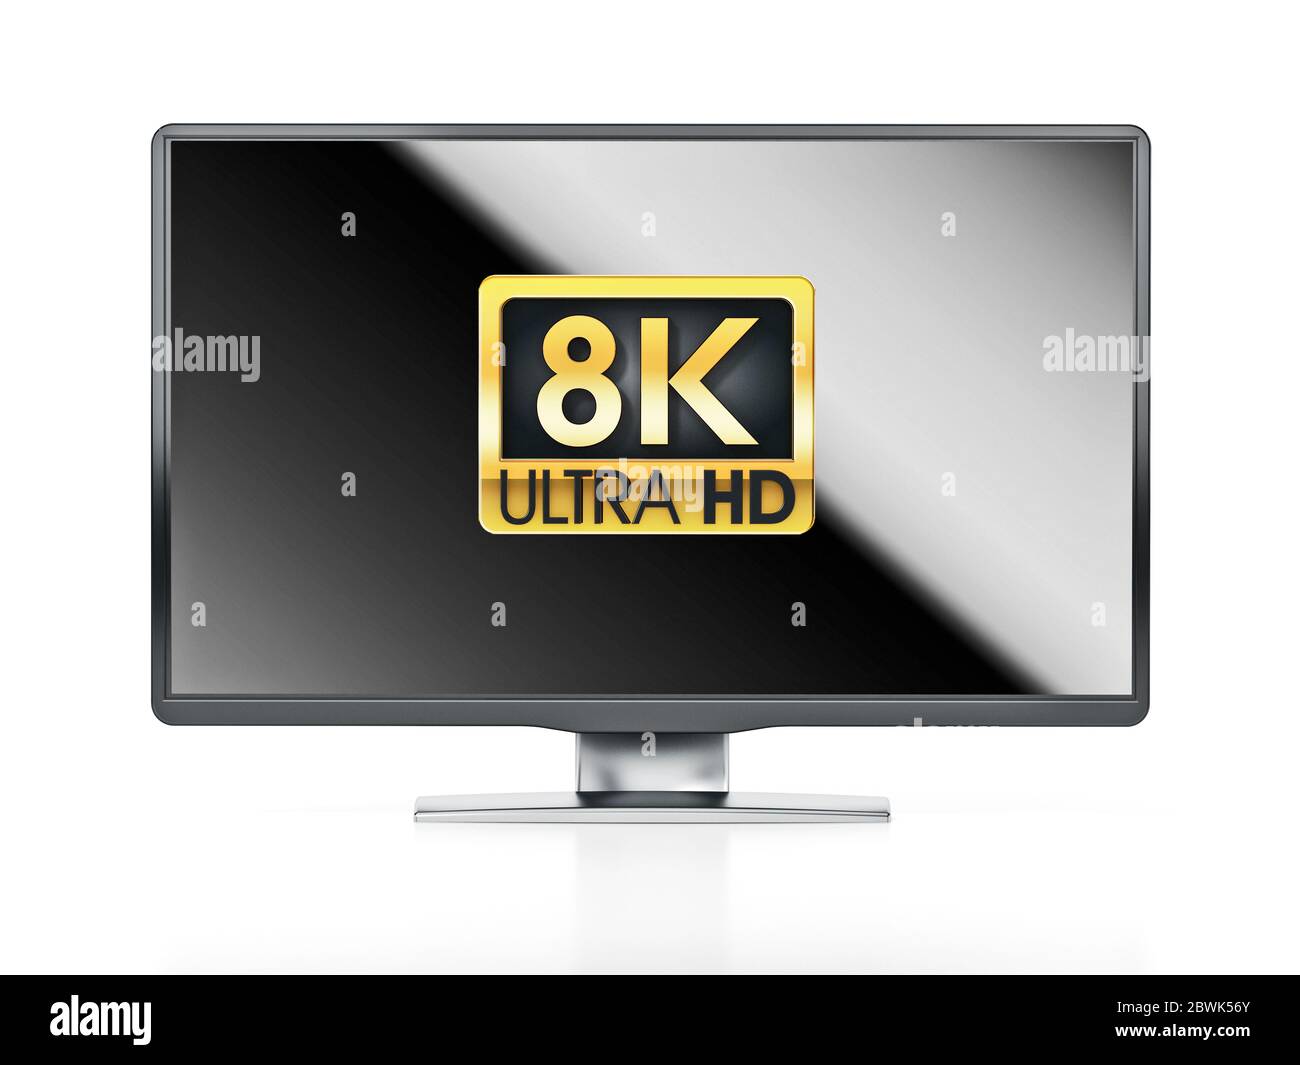 Gold 8K Ultra HD label on generic TV with reflection. 3D illustration. Stock Photo